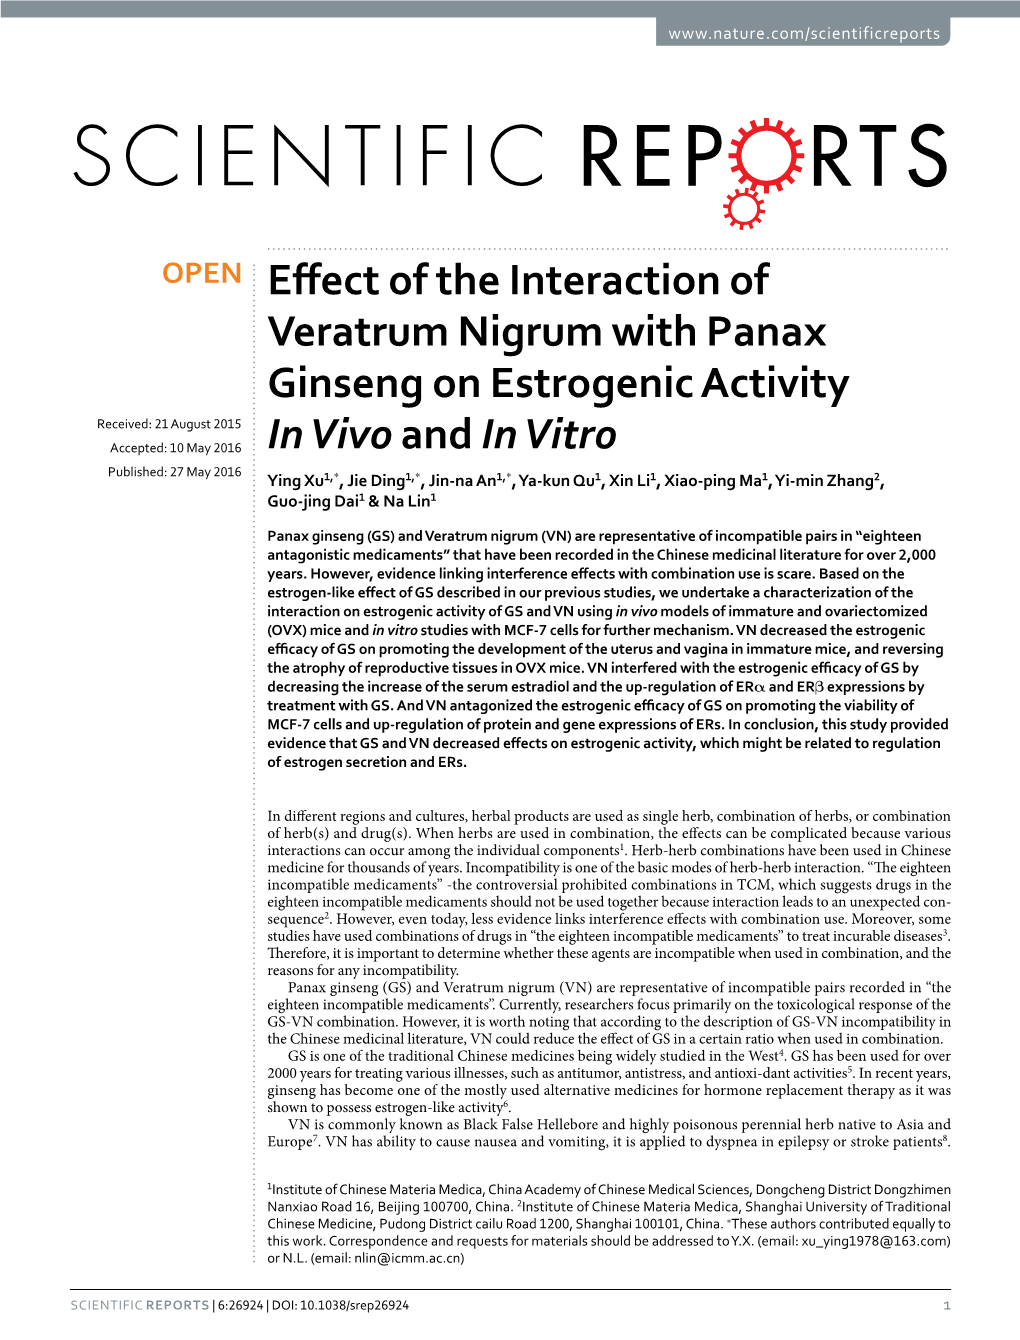 Effect of the Interaction of Veratrum Nigrum with Panax Ginseng On